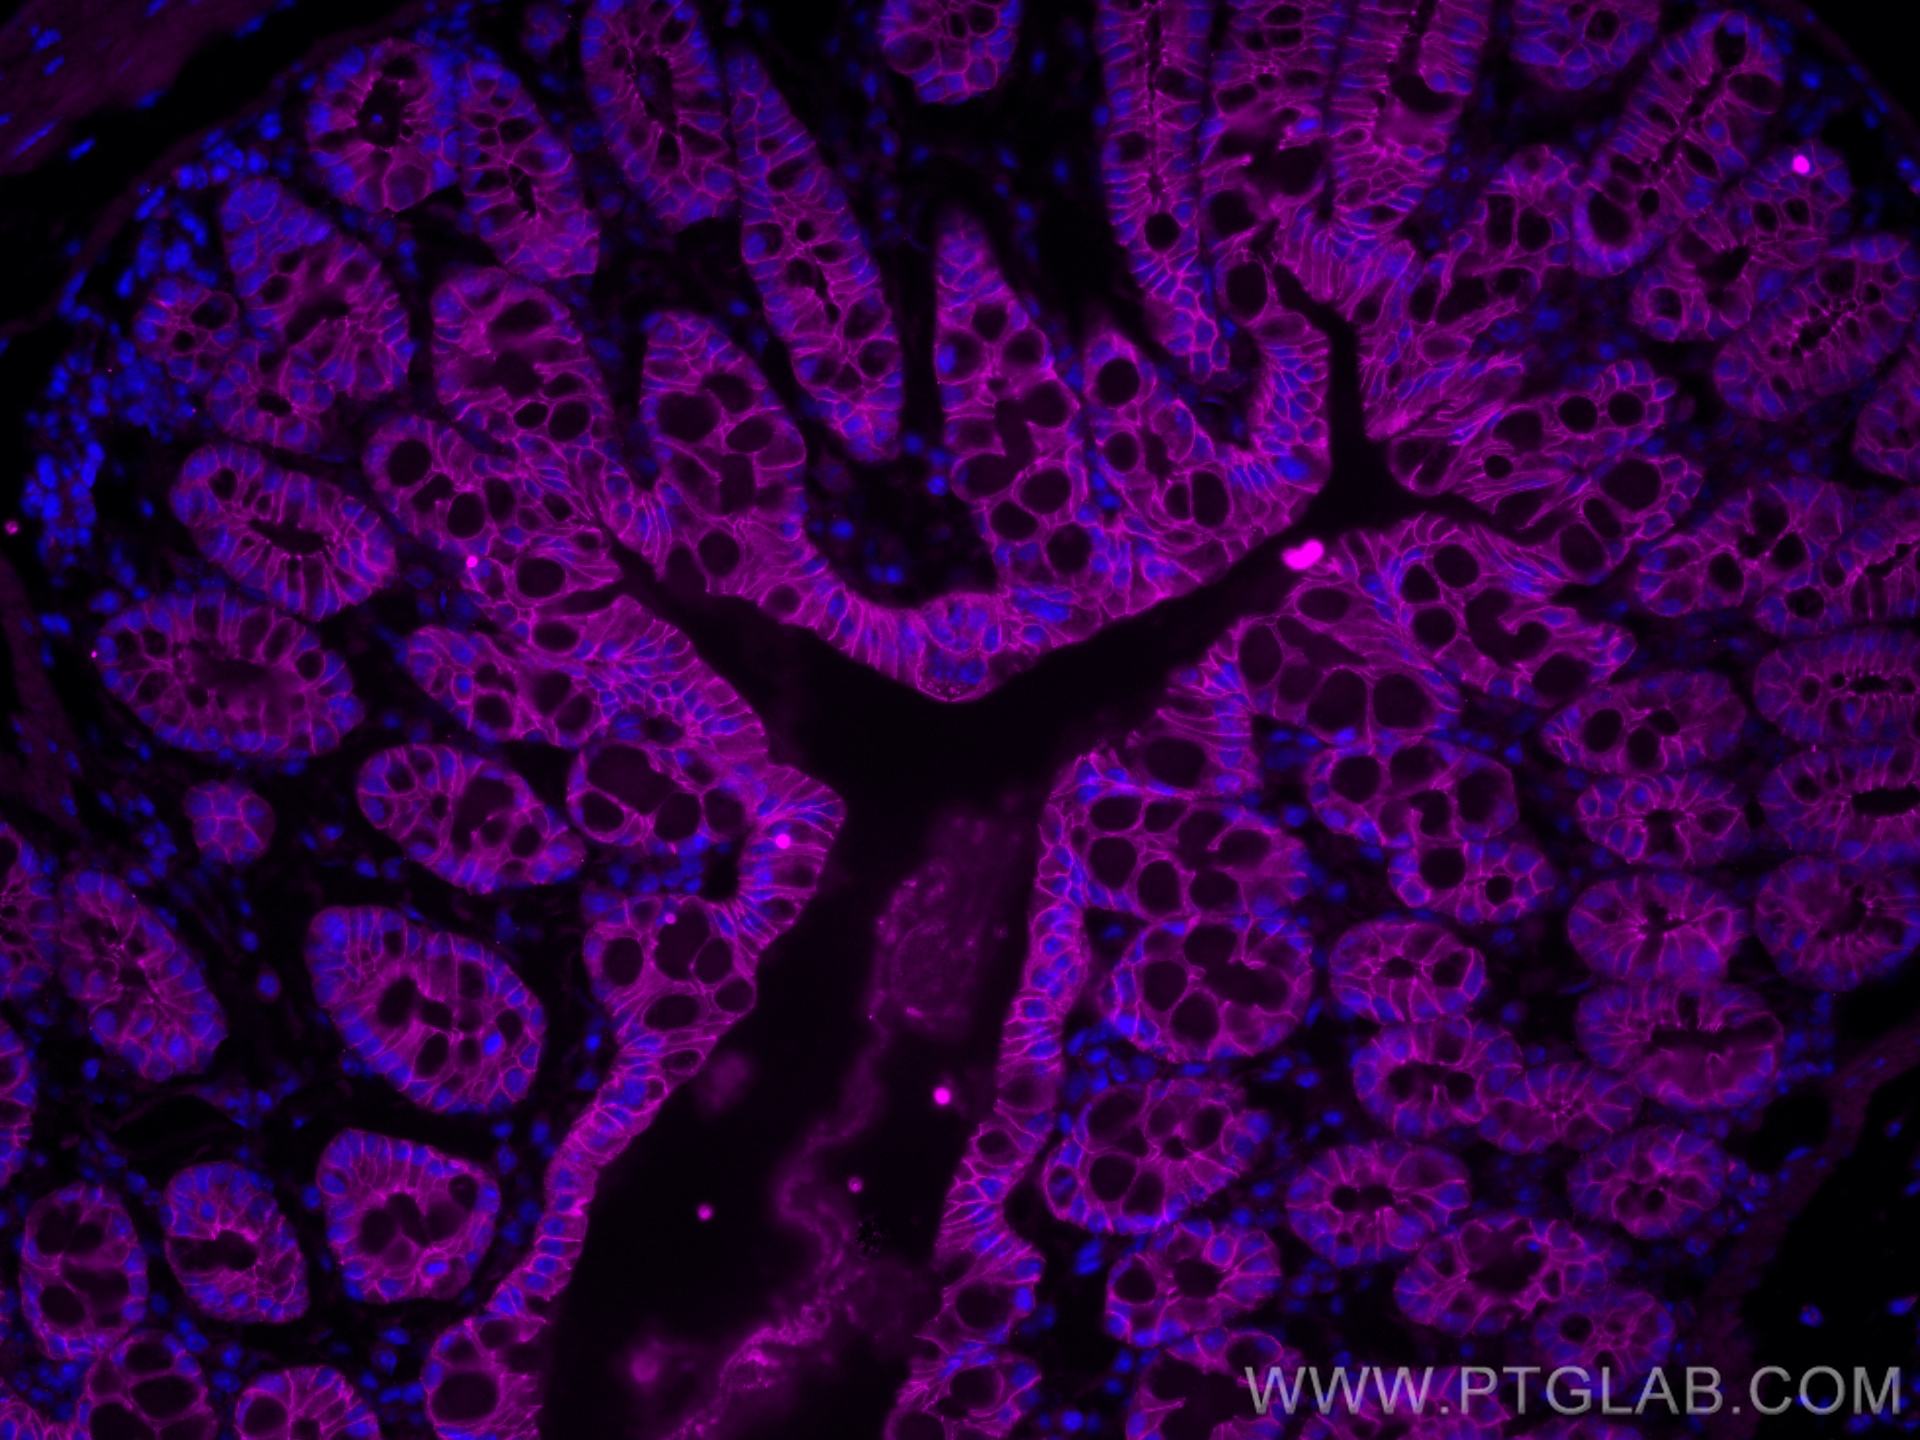 Immunofluorescent analysis of FFPE mouse colon tissue slides with Rat anti-mouse Cdh1 antibody labeled with FlexAble CoraLite Plus 647 Kit (KFA123, magenta). With/without quencher. Cell nuclei were stained with DAPI (blue).